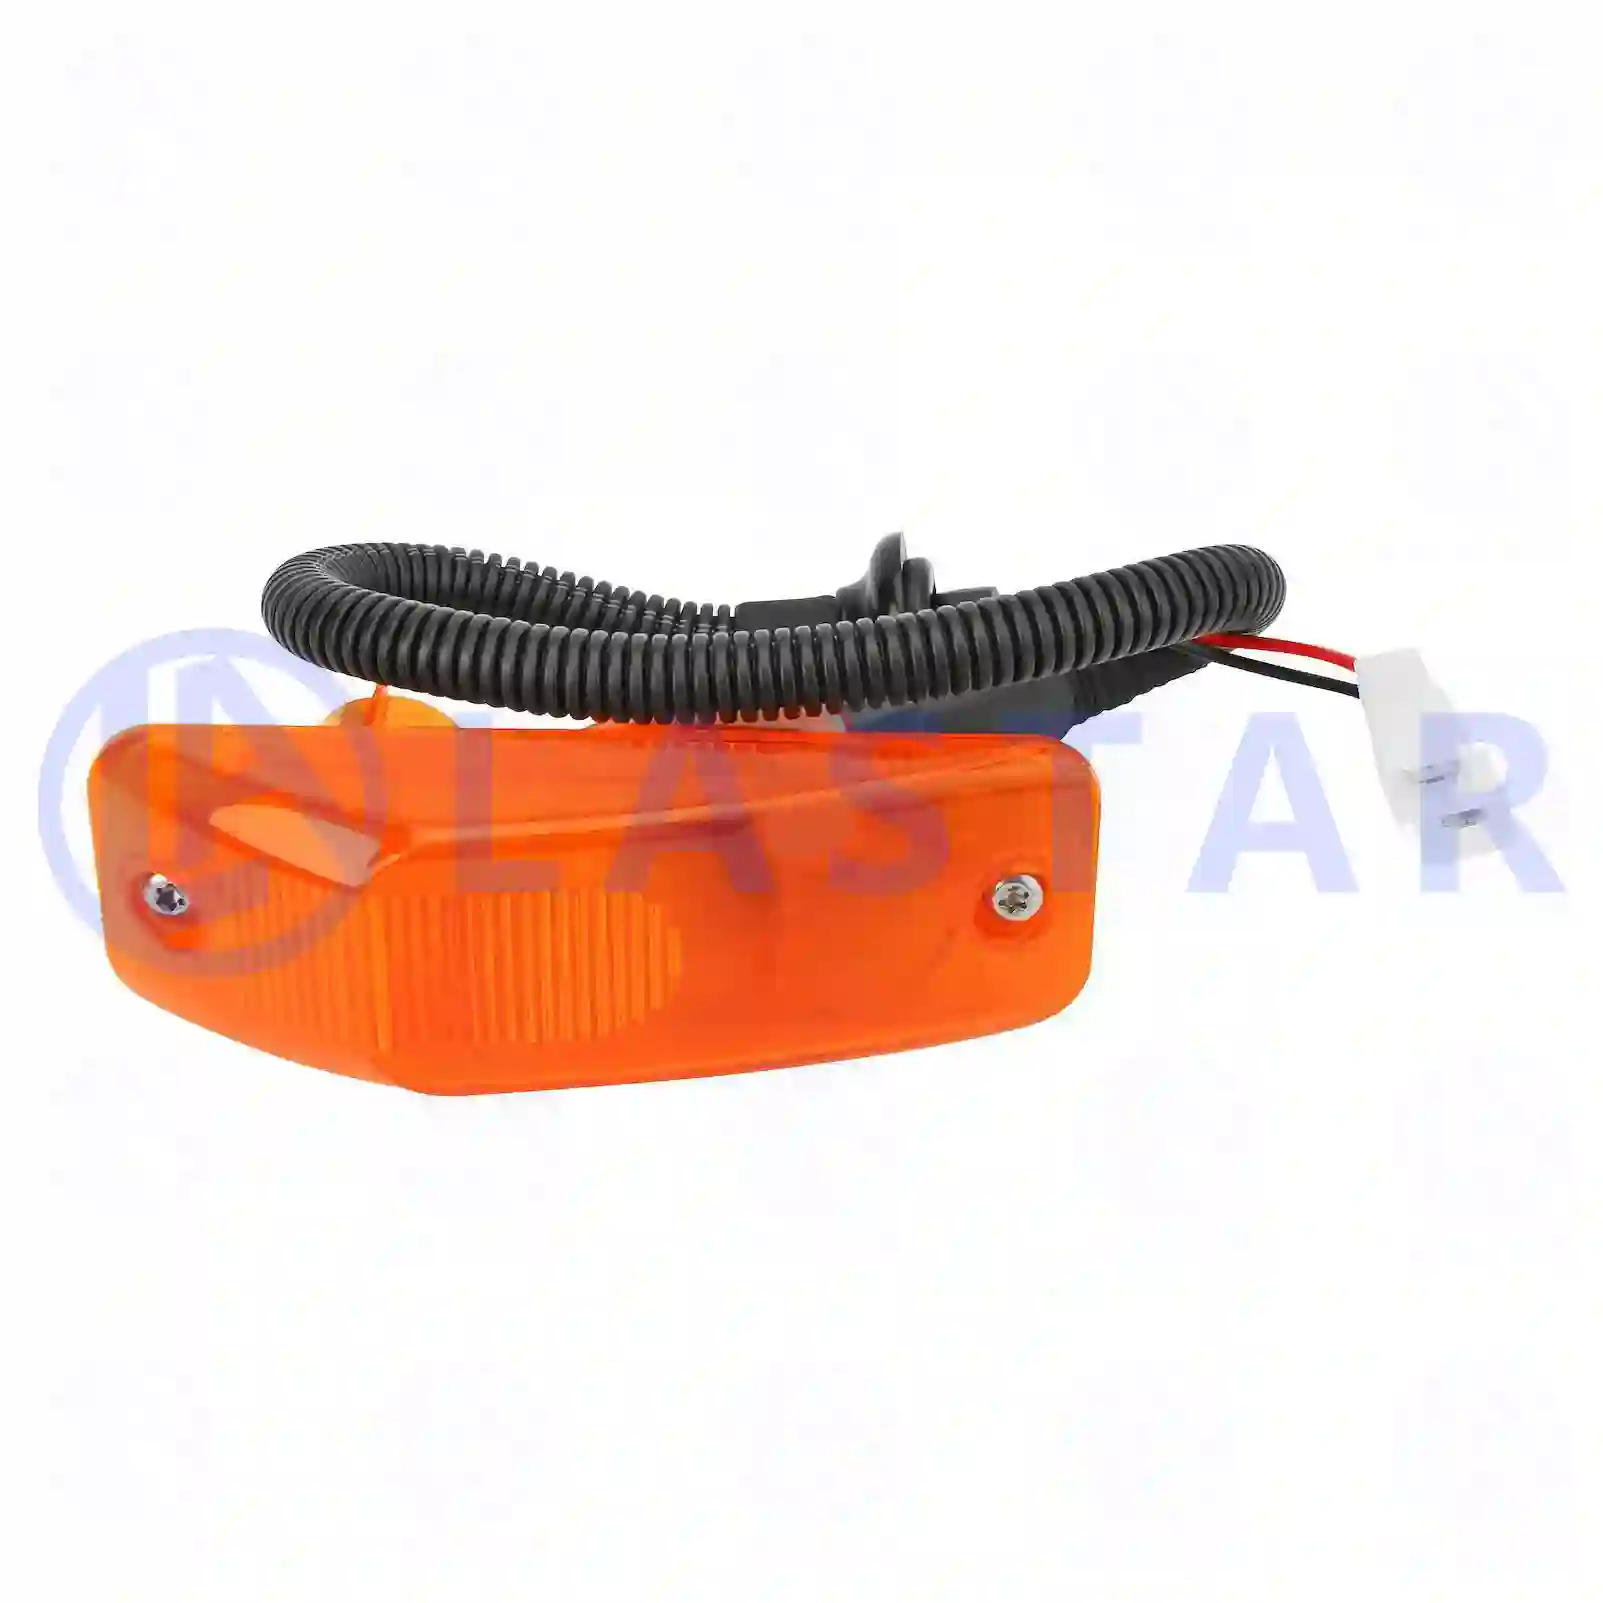  Turn signal lamp, lateral || Lastar Spare Part | Truck Spare Parts, Auotomotive Spare Parts